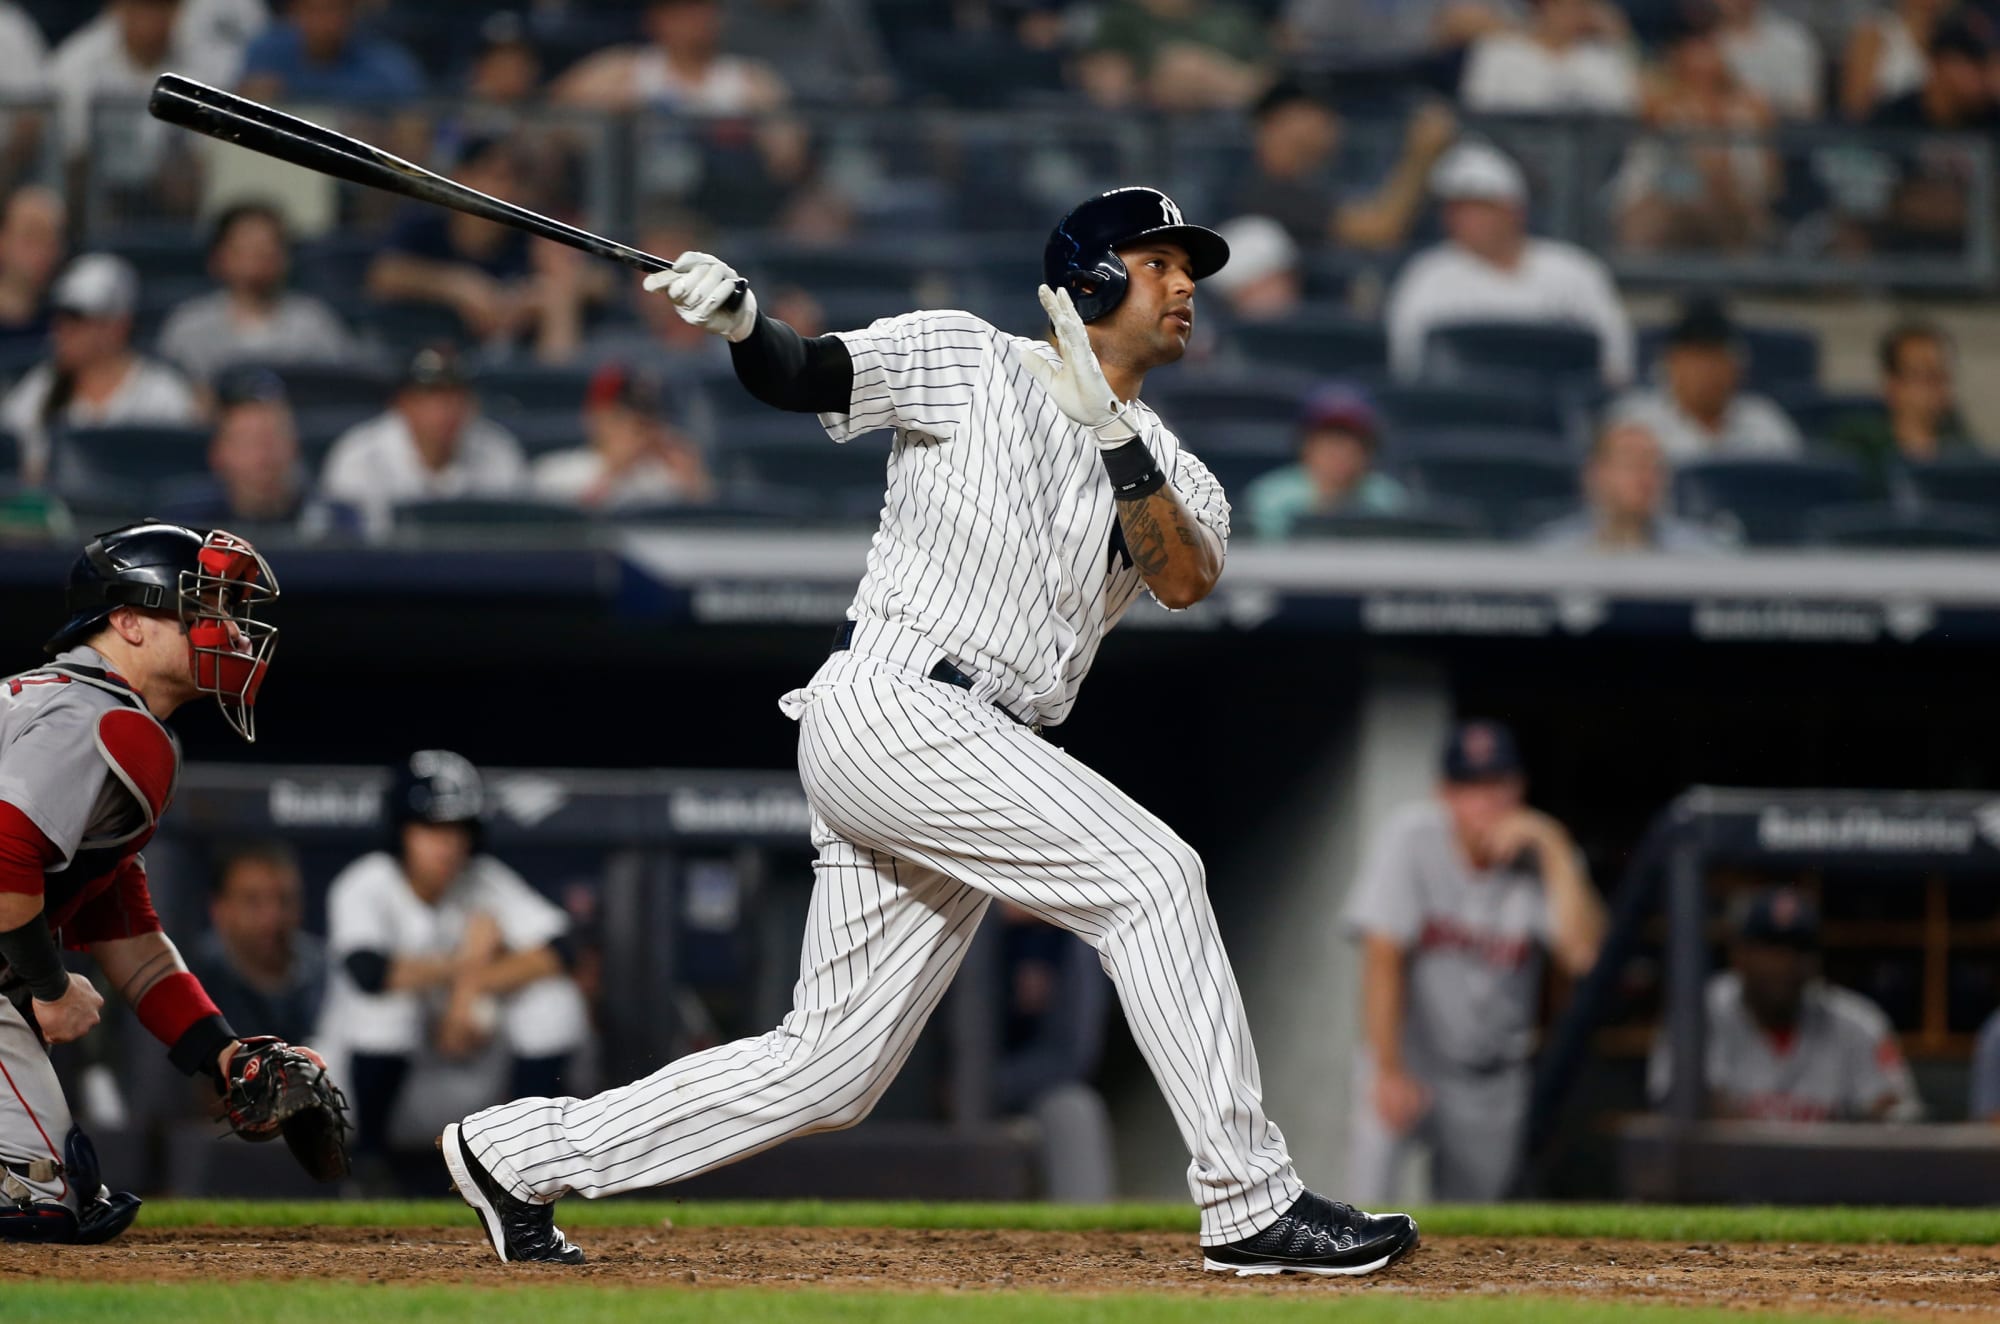 Yankees Who was their most improved player in 2018?